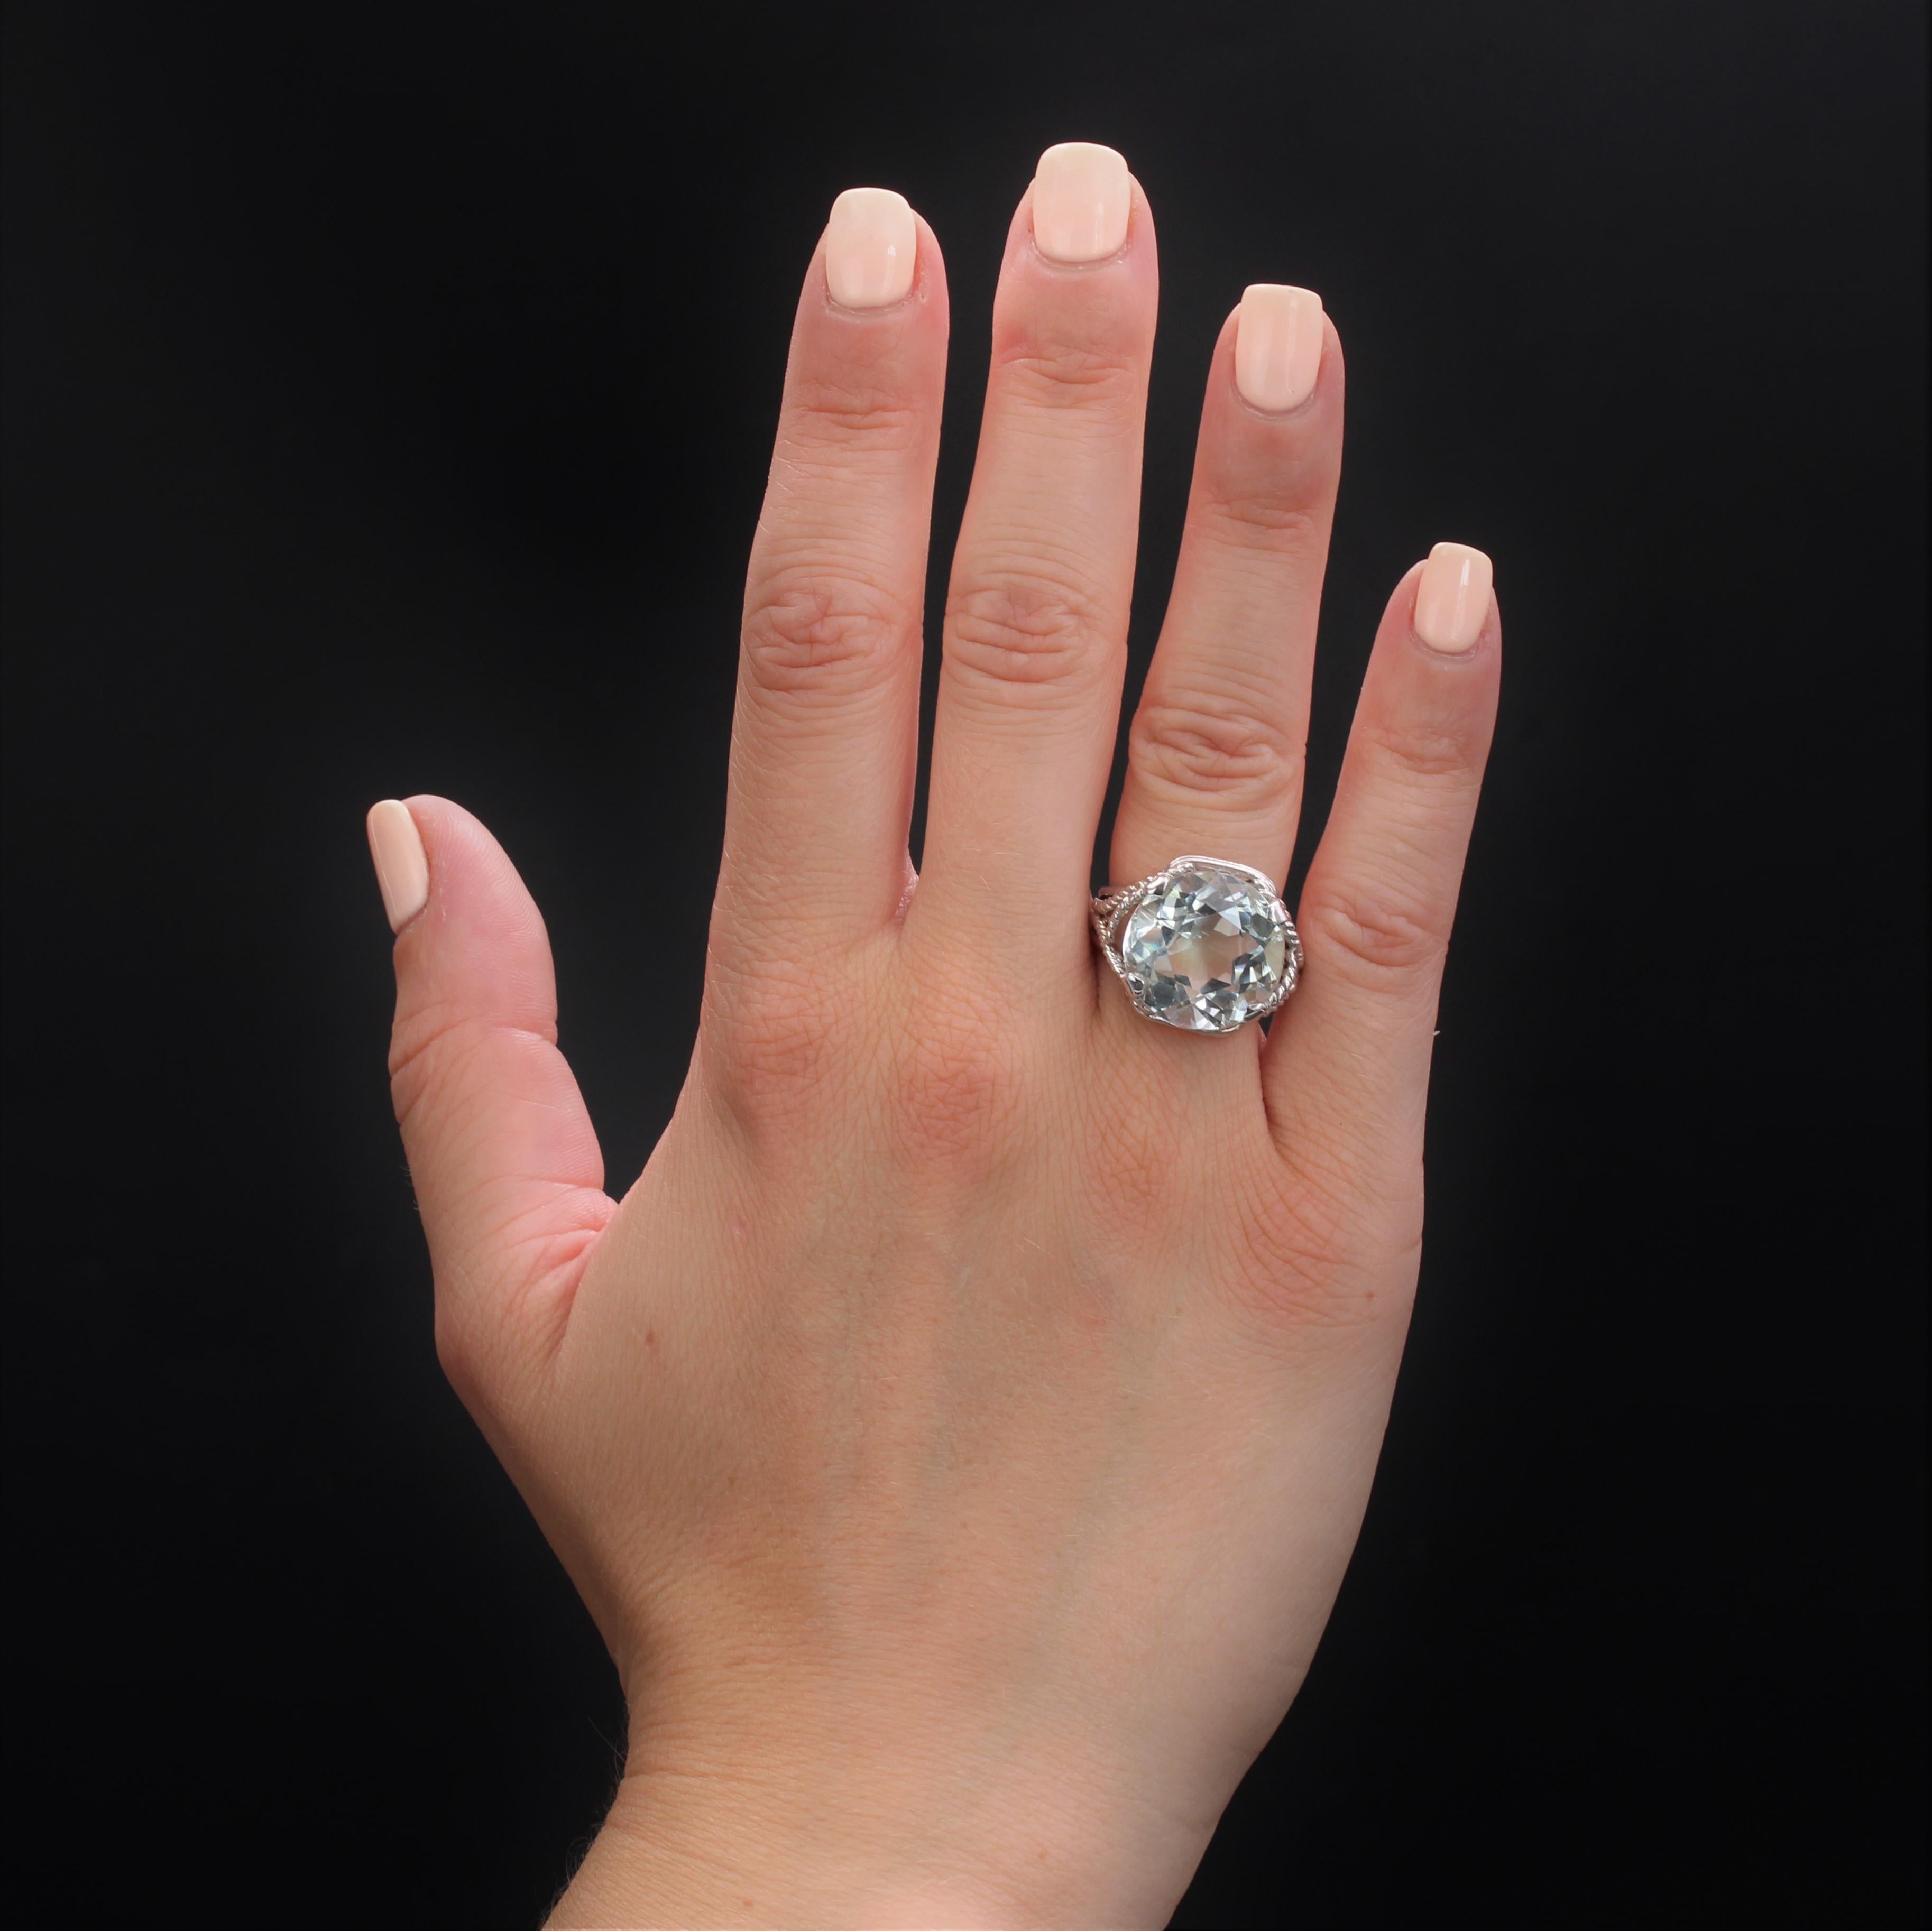 Ring in 18 karat white gold, eagle head hallmark and platinum, dog head hallmark.
An important vintage ring, its setting is formed of twisted gold wires and smooth gold wires that wrap around the start of the ring to form the basket. In the center,